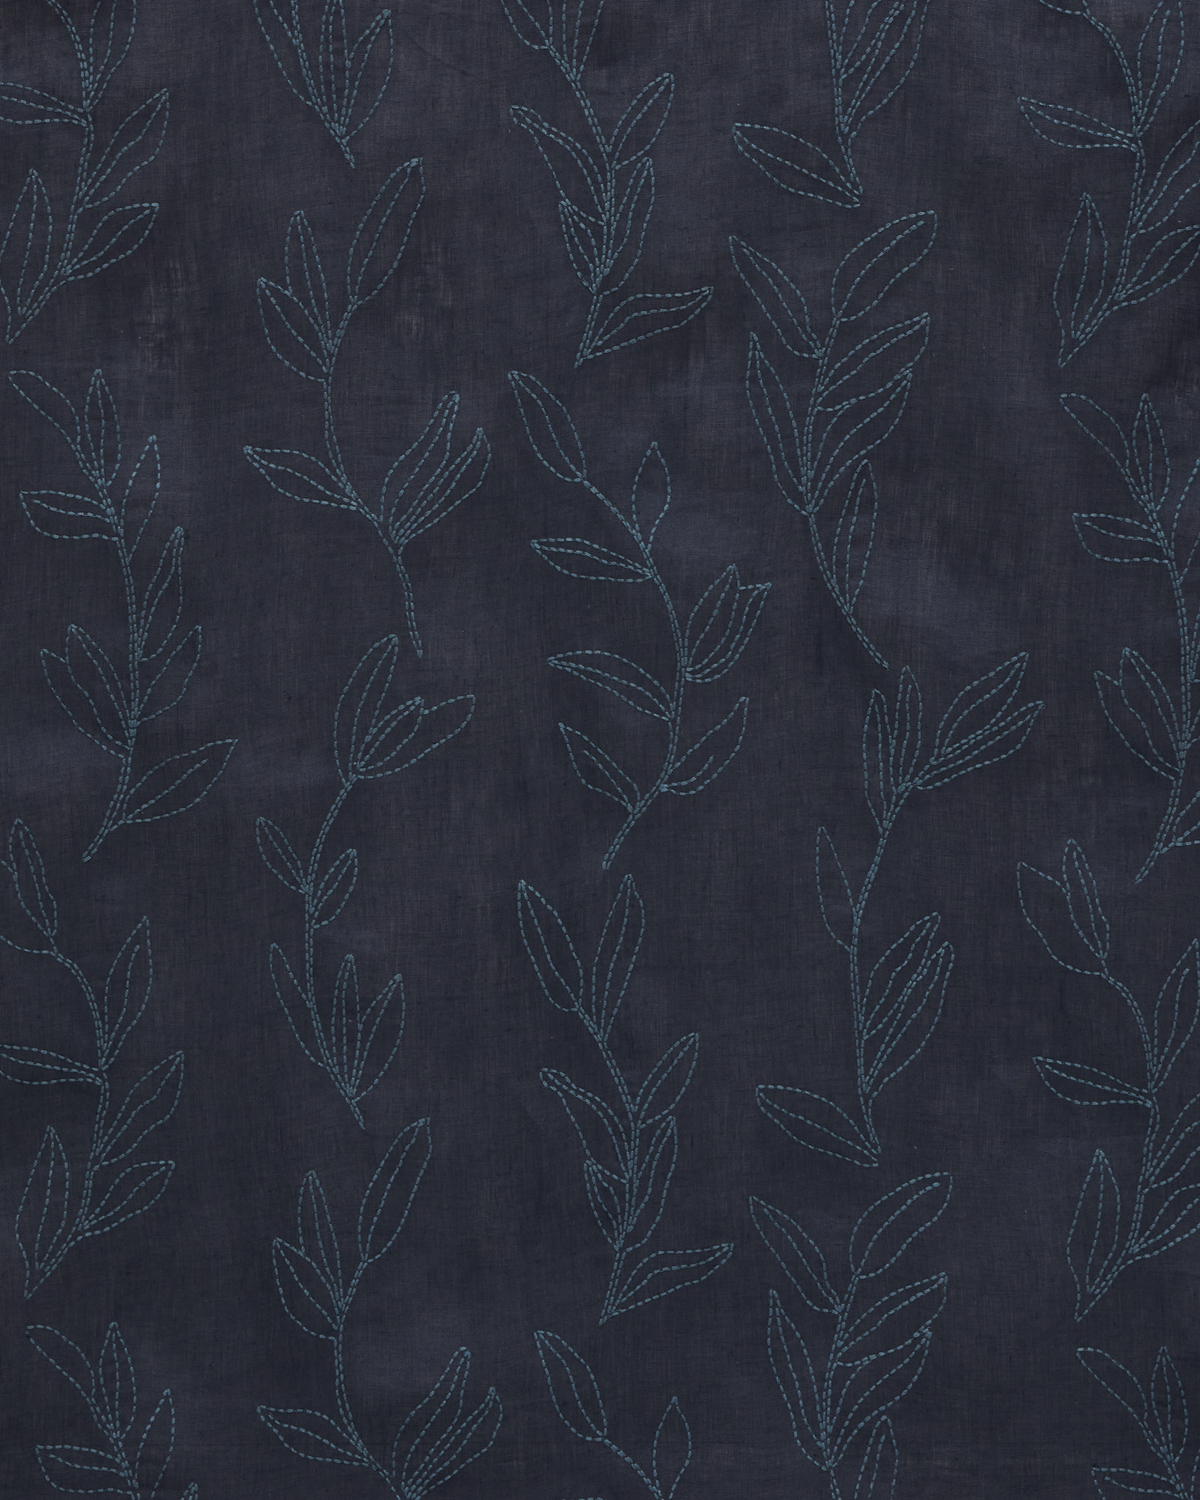 Linear Stem Sheer Fabric in Washed Navy